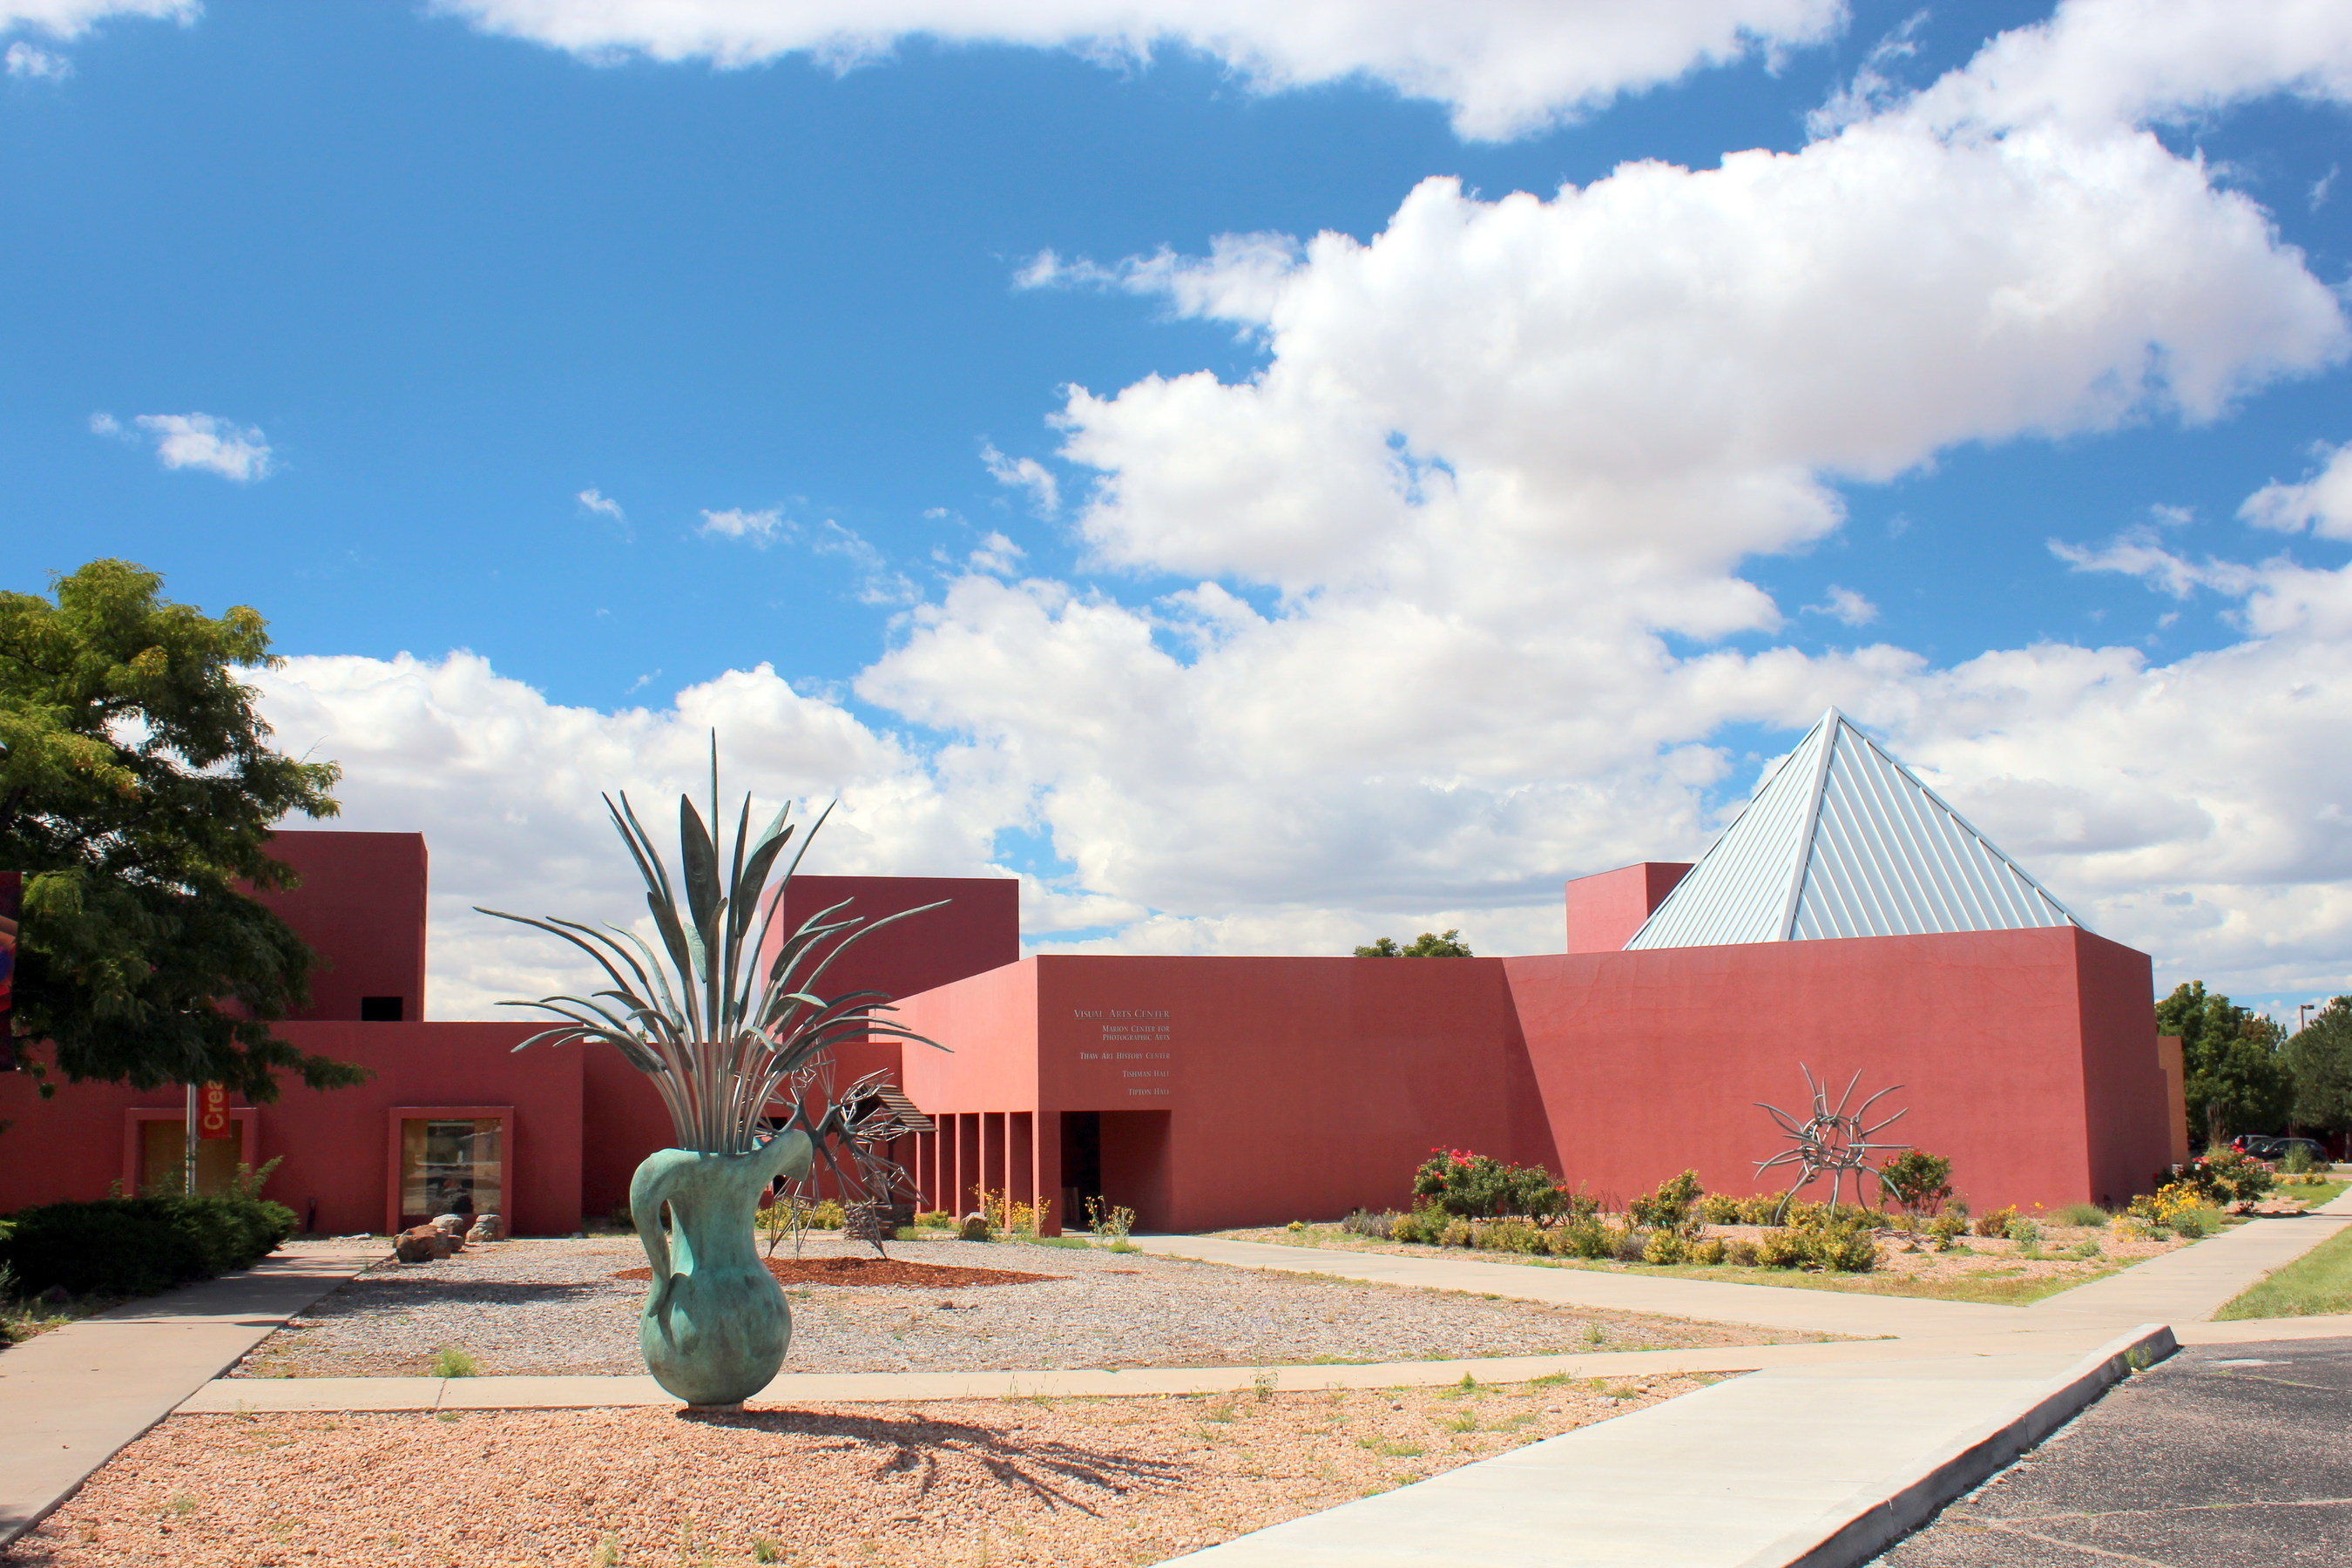 Variety Magazine named Santa Fe University of Art & Design as a Top Entertainment School on the Move, recognizing the University for its innovative and cutting-edge programs that offer competitive, top-notch education in all aspects of film, production, theater and media.